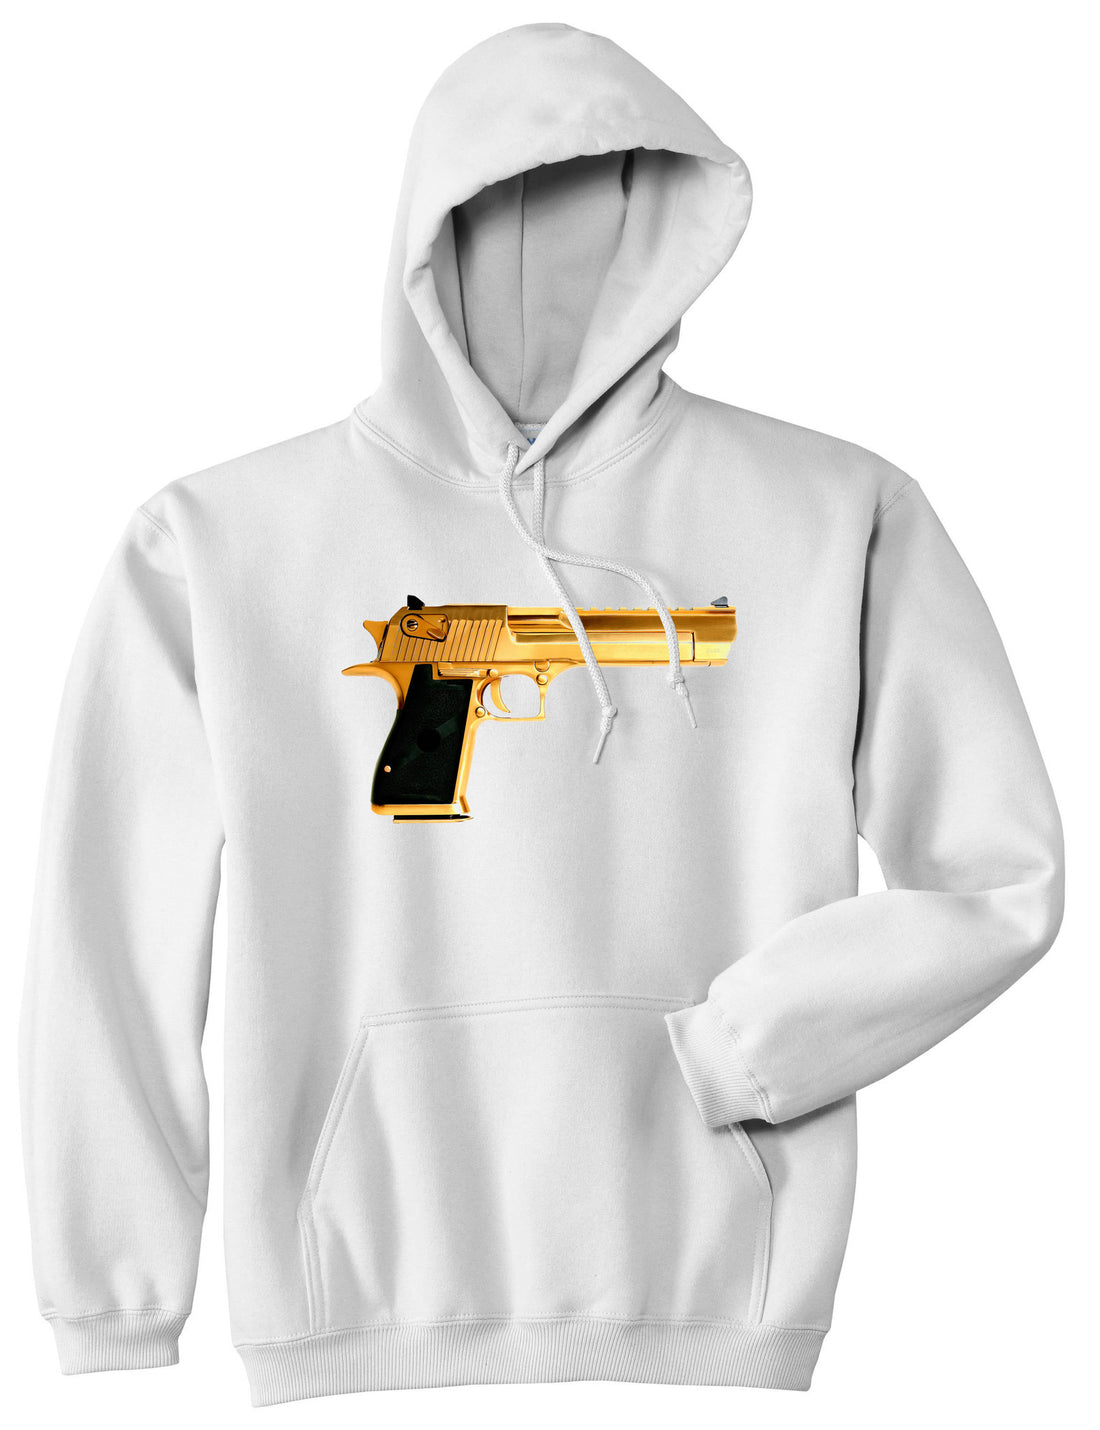 Gold Gun 9mm Revolver Chrome 45 Boys Kids Pullover Hoodie Hoody in White by Kings Of NY